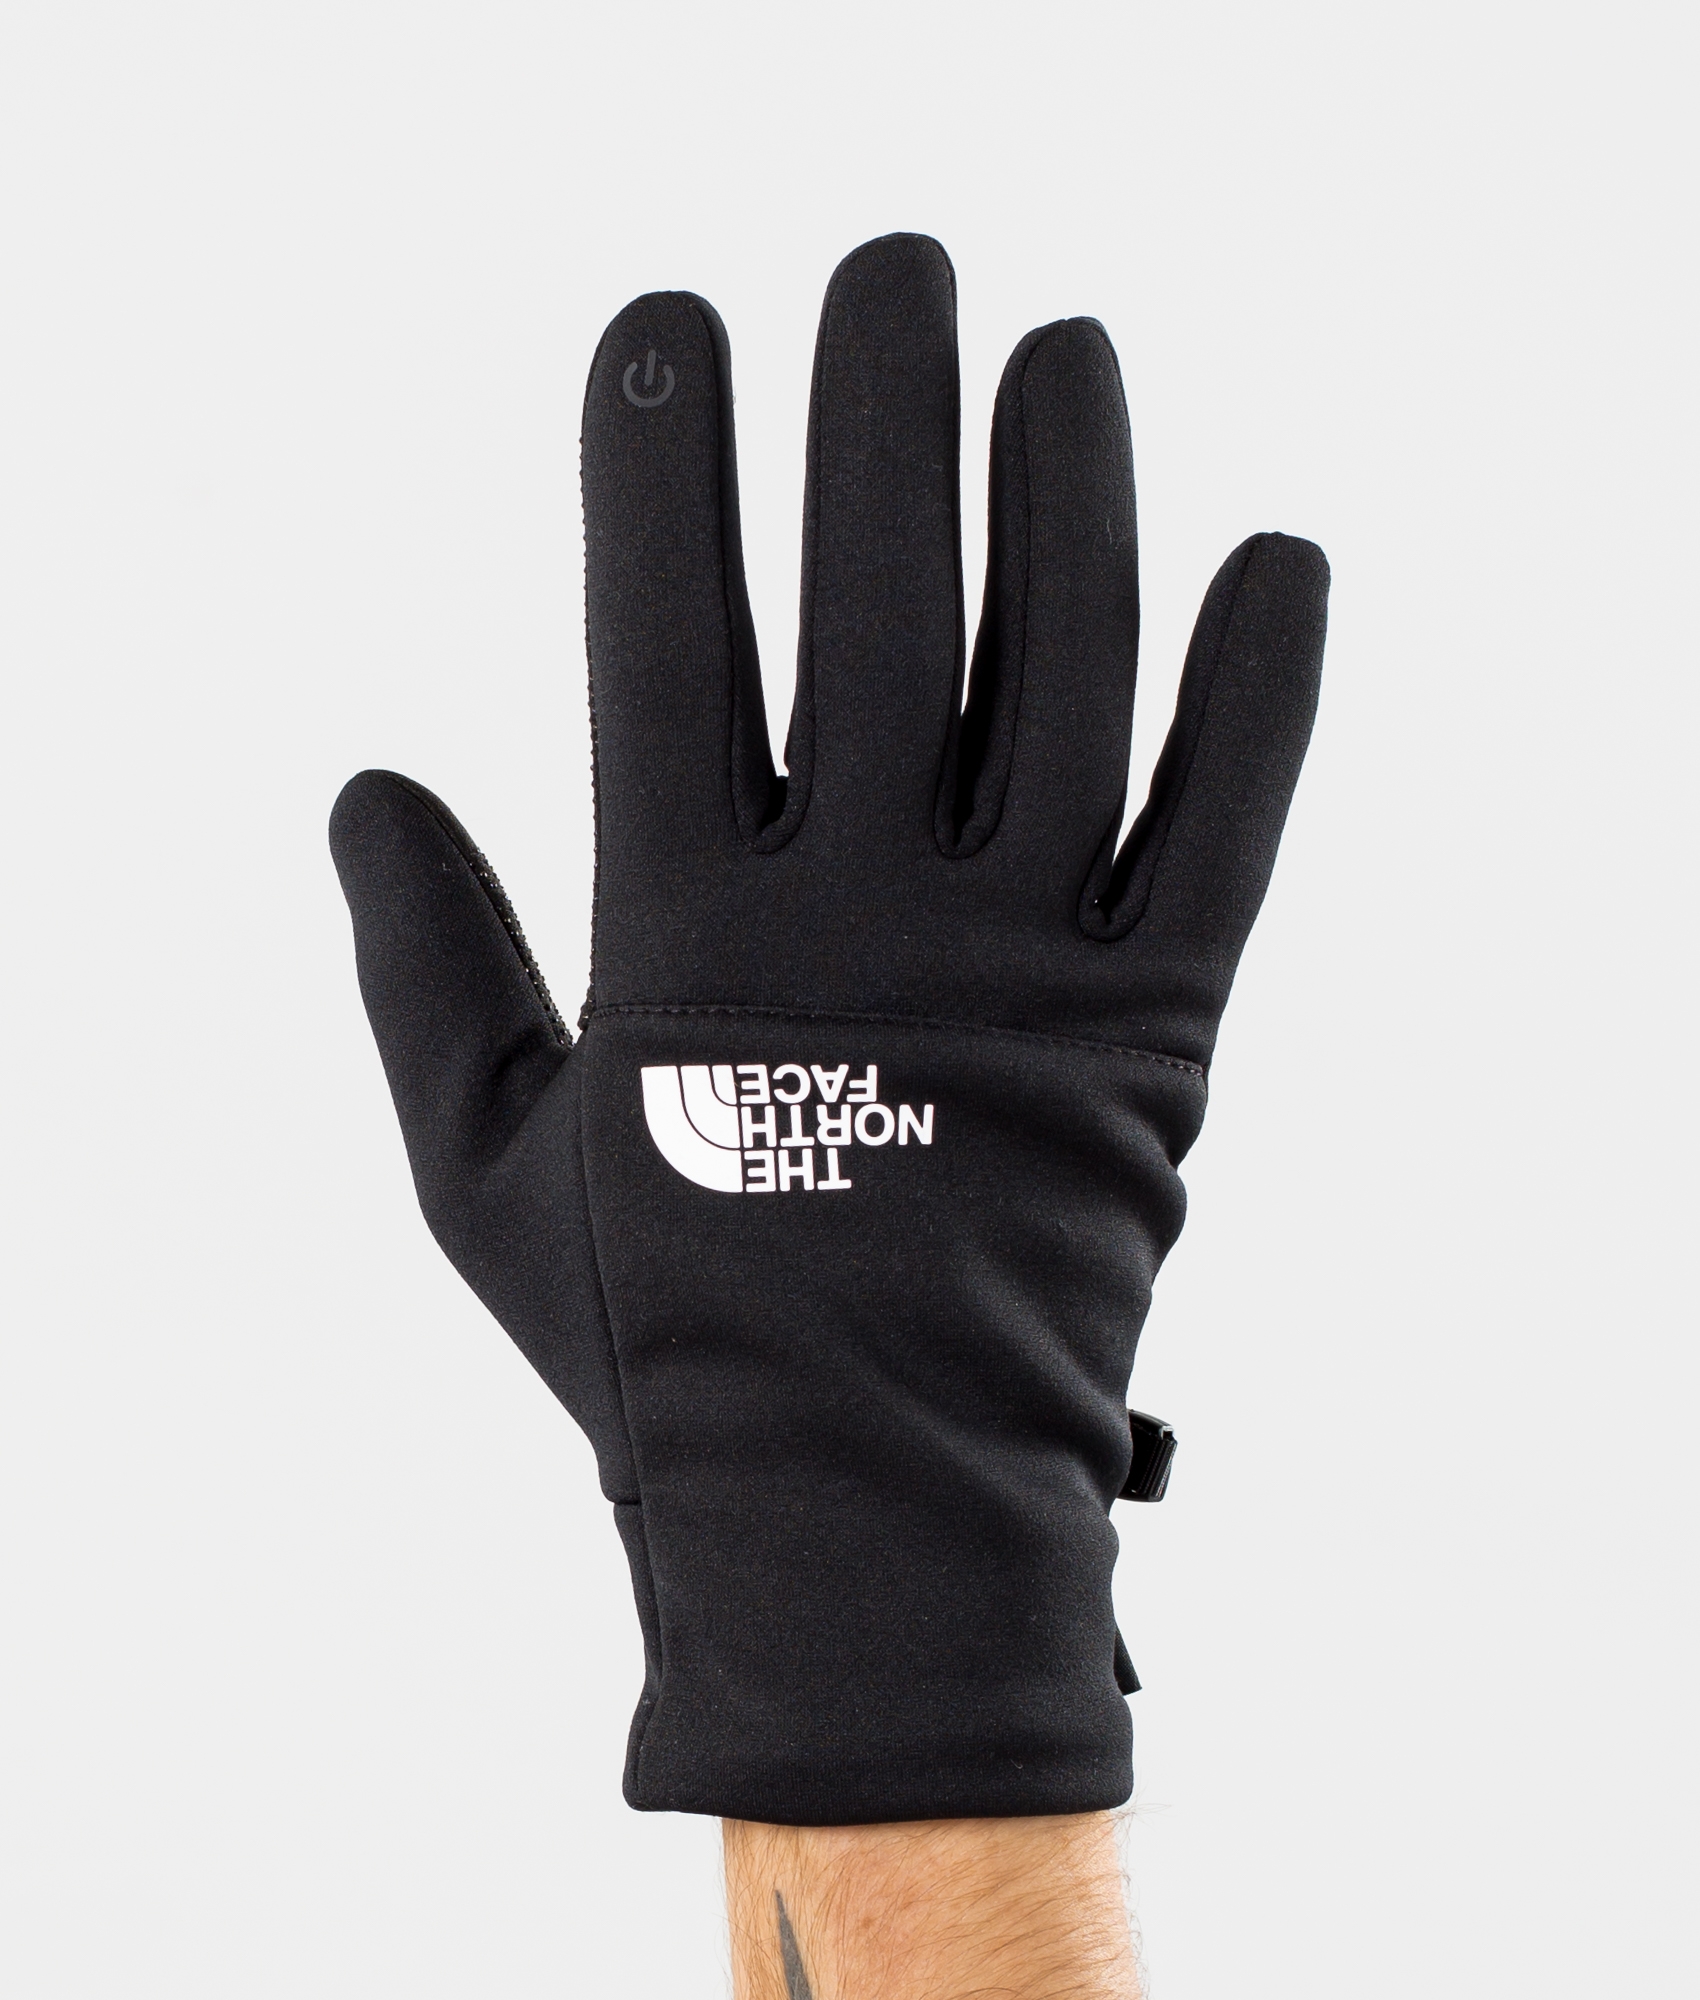 north face thin gloves